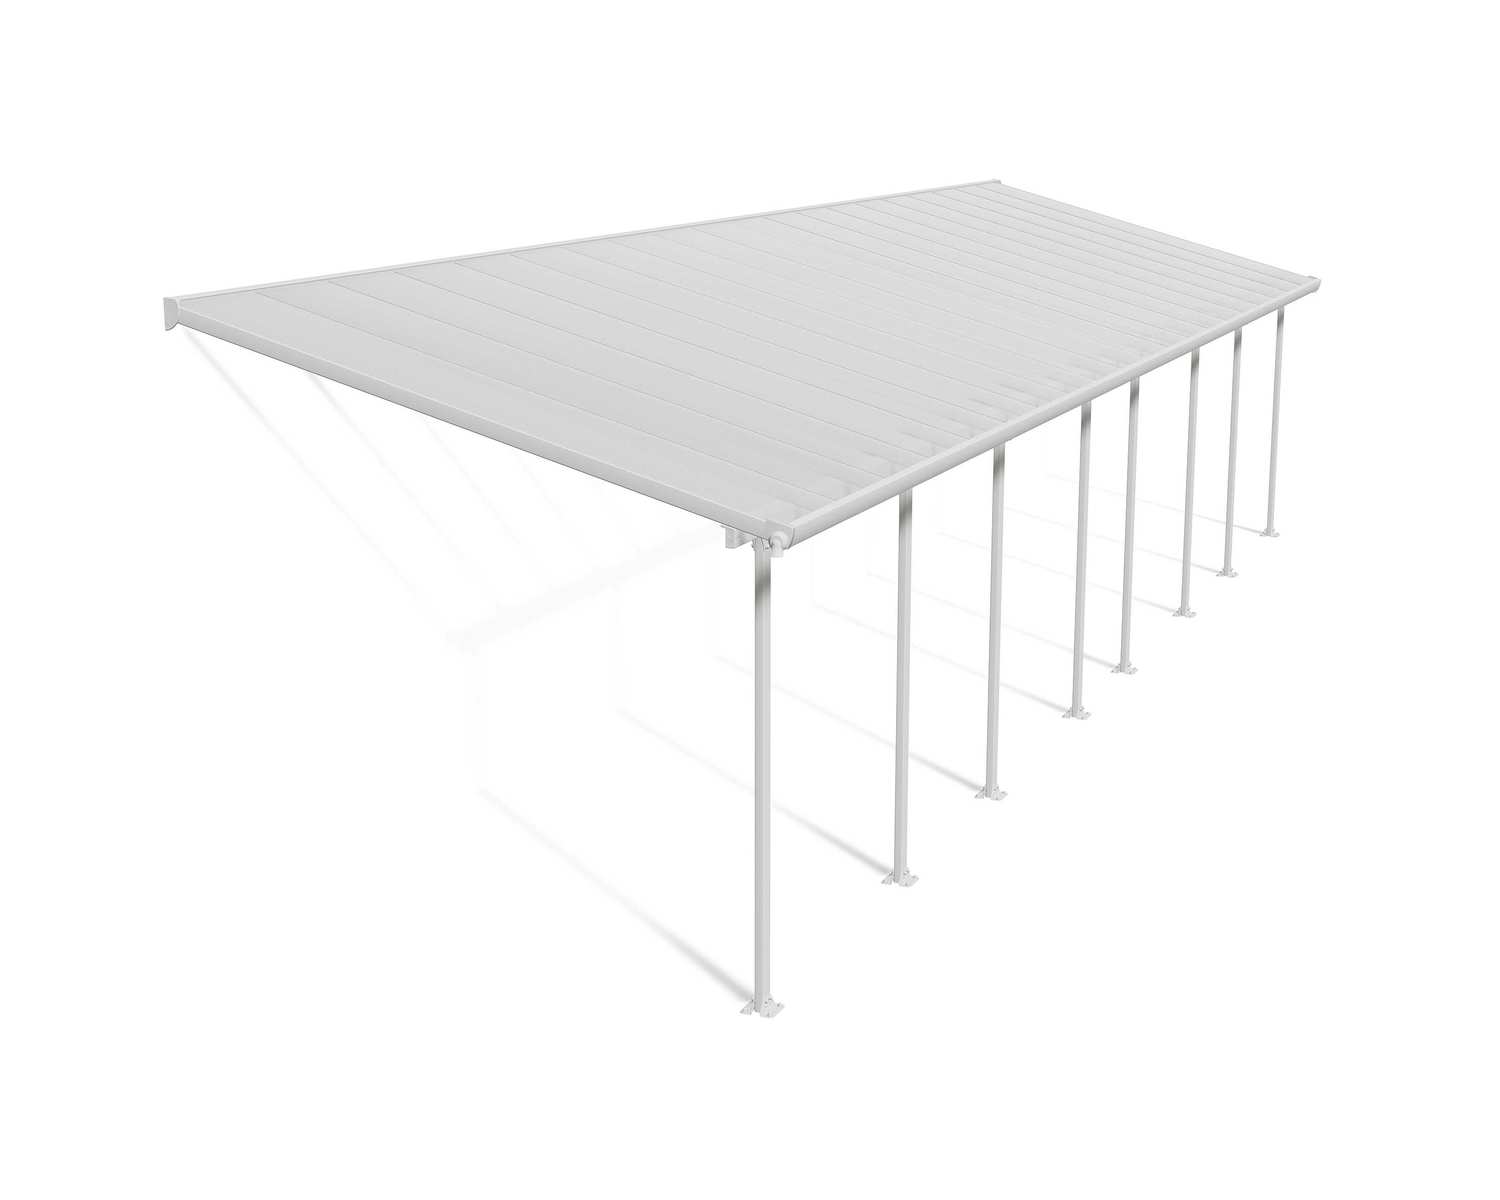 Feria 10 ft. x 36 ft. White Aluminium Patio Cover With 8 Posts, Clear Twin-Wall Polycarbonate Roof Panels.